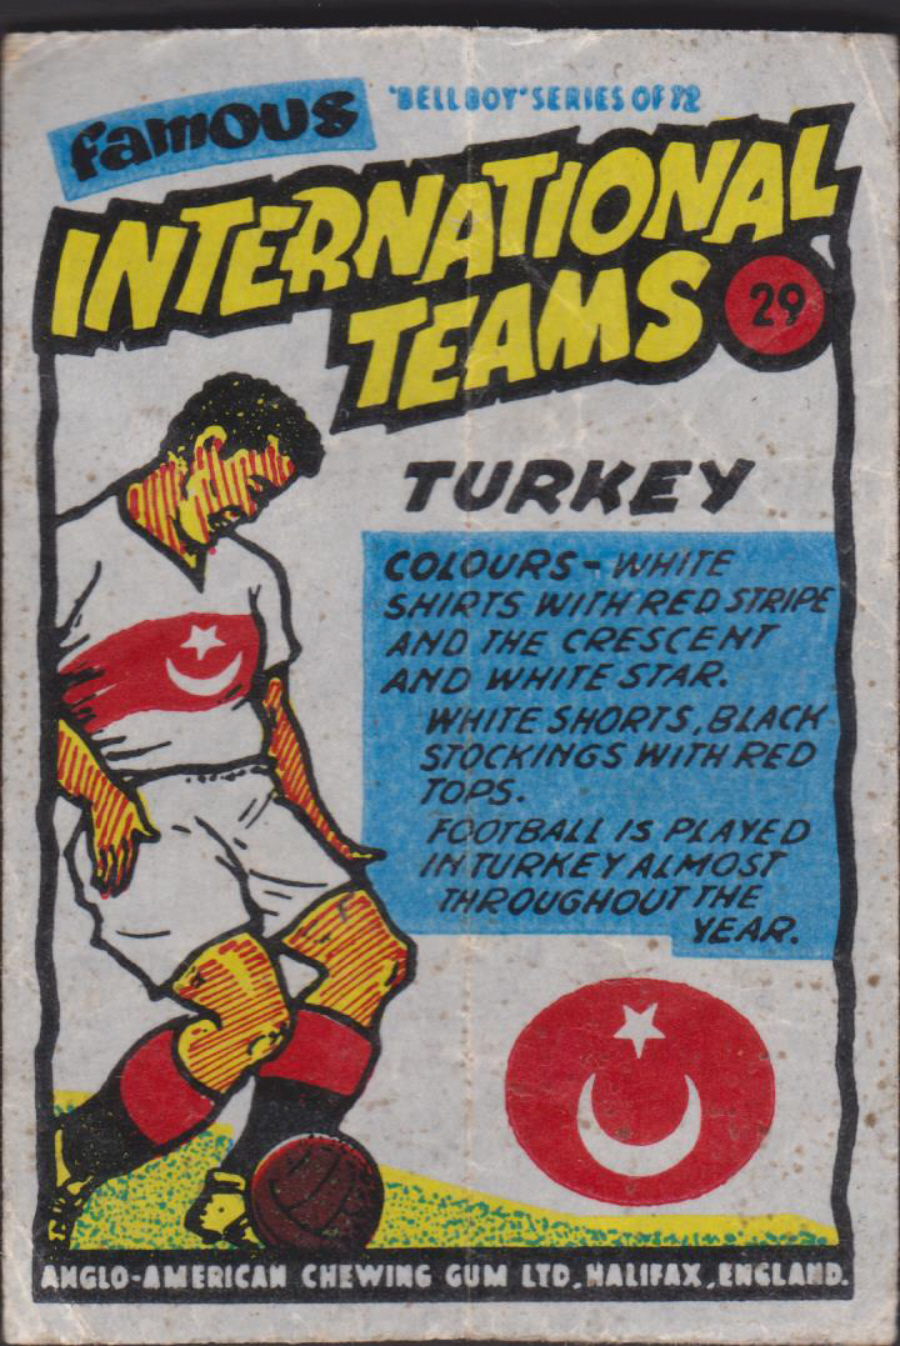 Anglo-American-Chewing-Gum-Wax-Wrapper-Famous International Teams -No-29 -Turkey - Click Image to Close